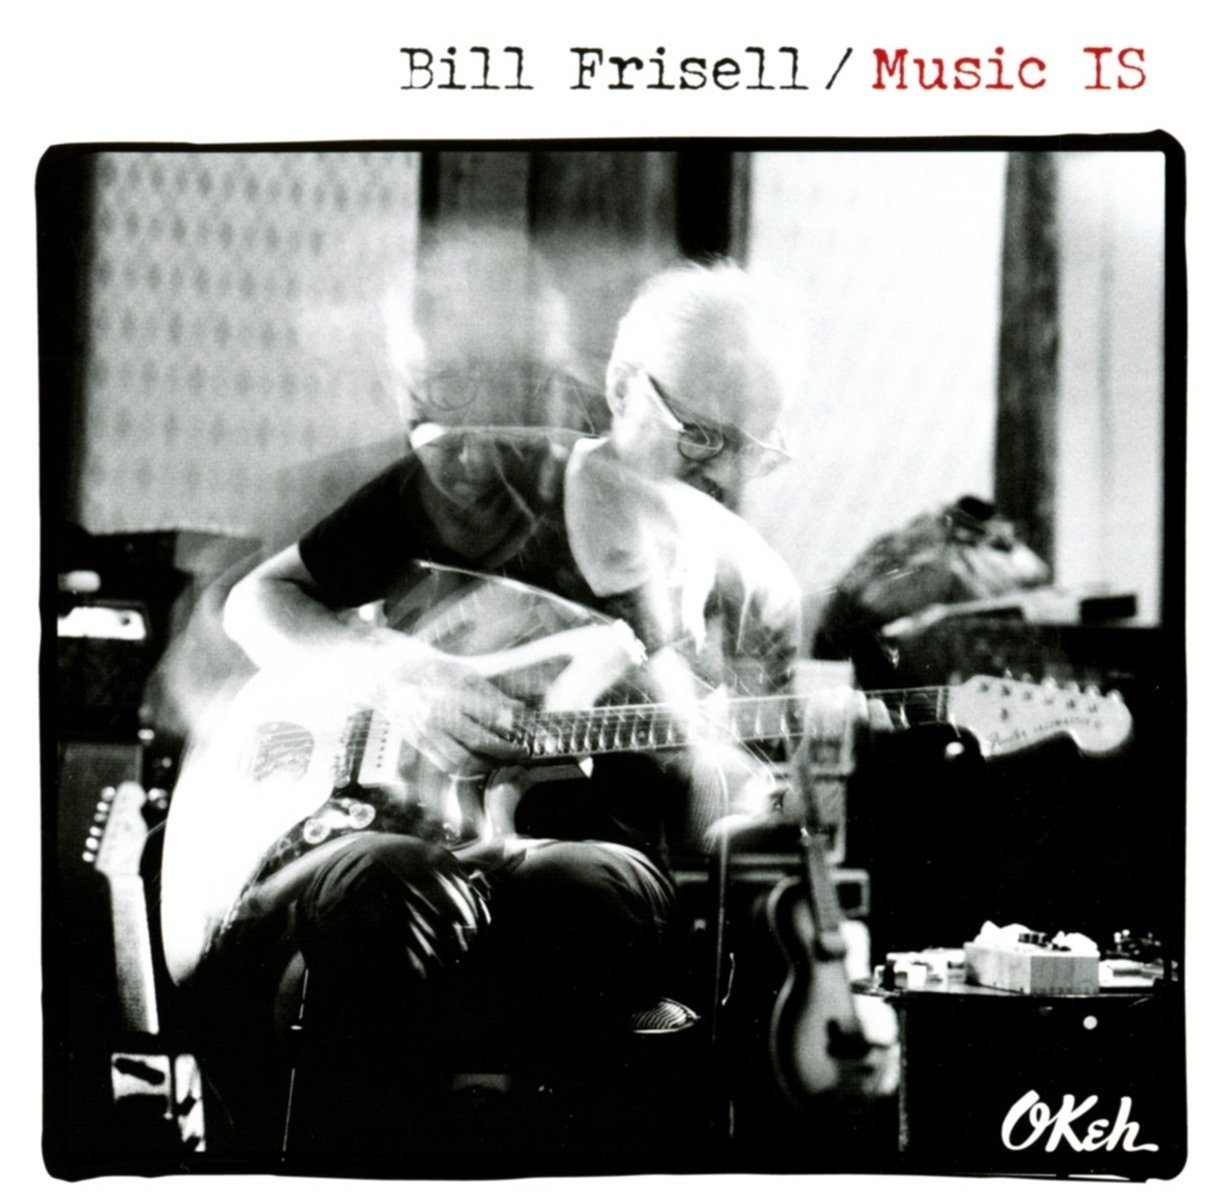 Music IS | Bill Frisell